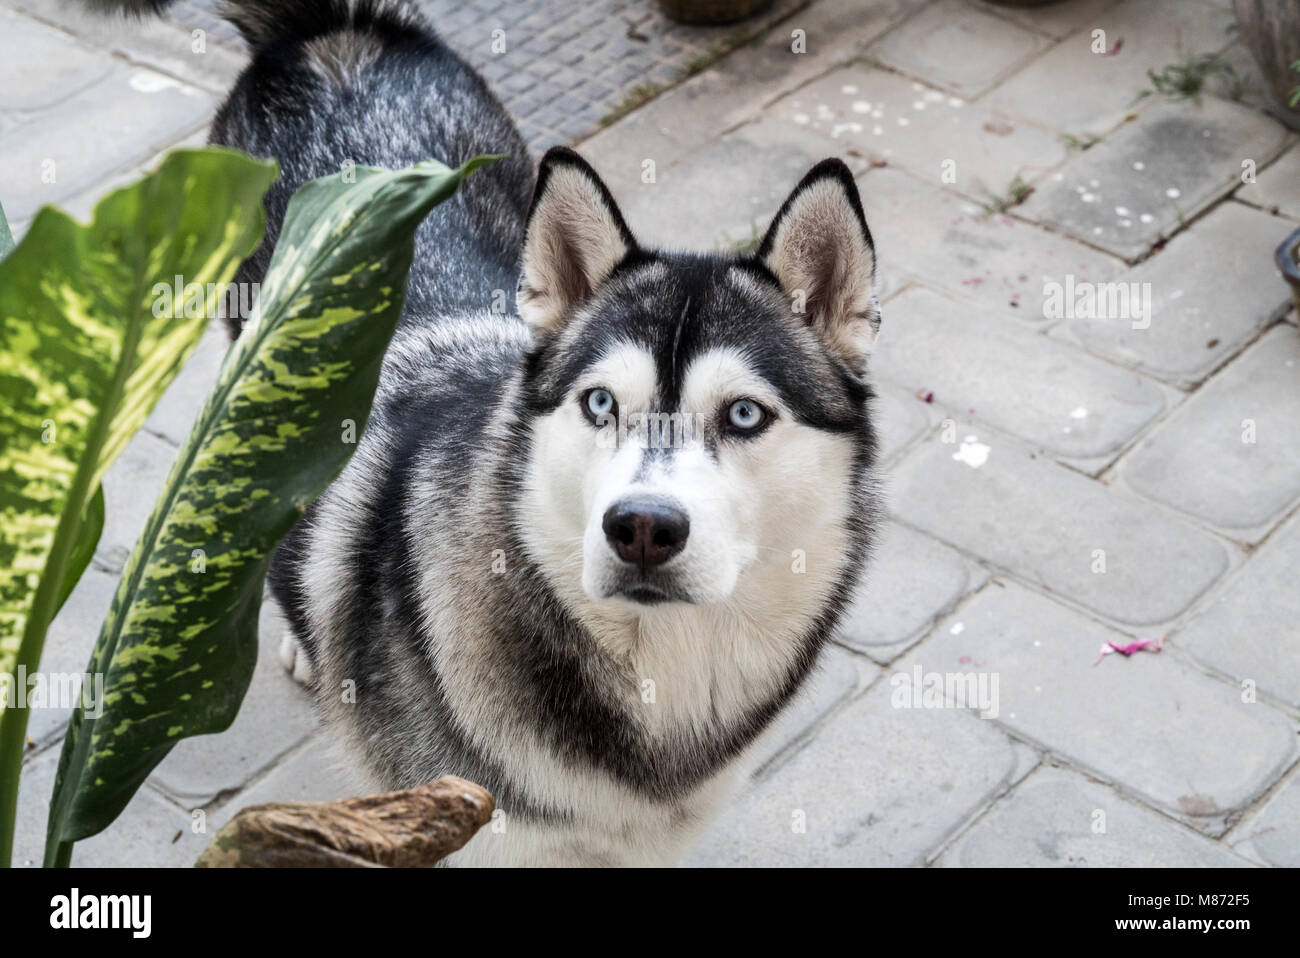 Siberian Husky female dog with Wolf Grey Coat and Ice blue eyes in a magnetic pose. Stock Photo